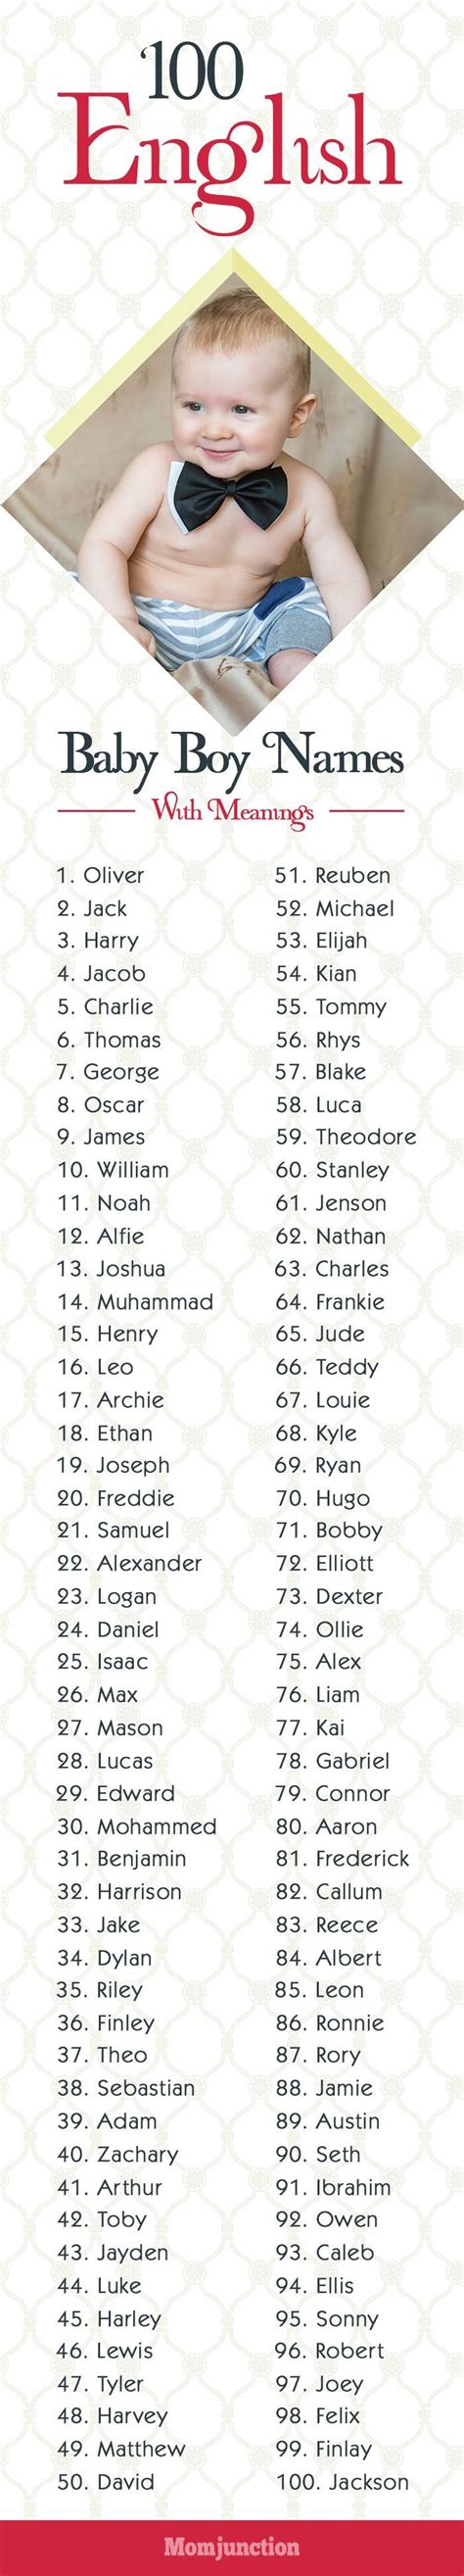 721 Best Baby Names Images On Pinterest